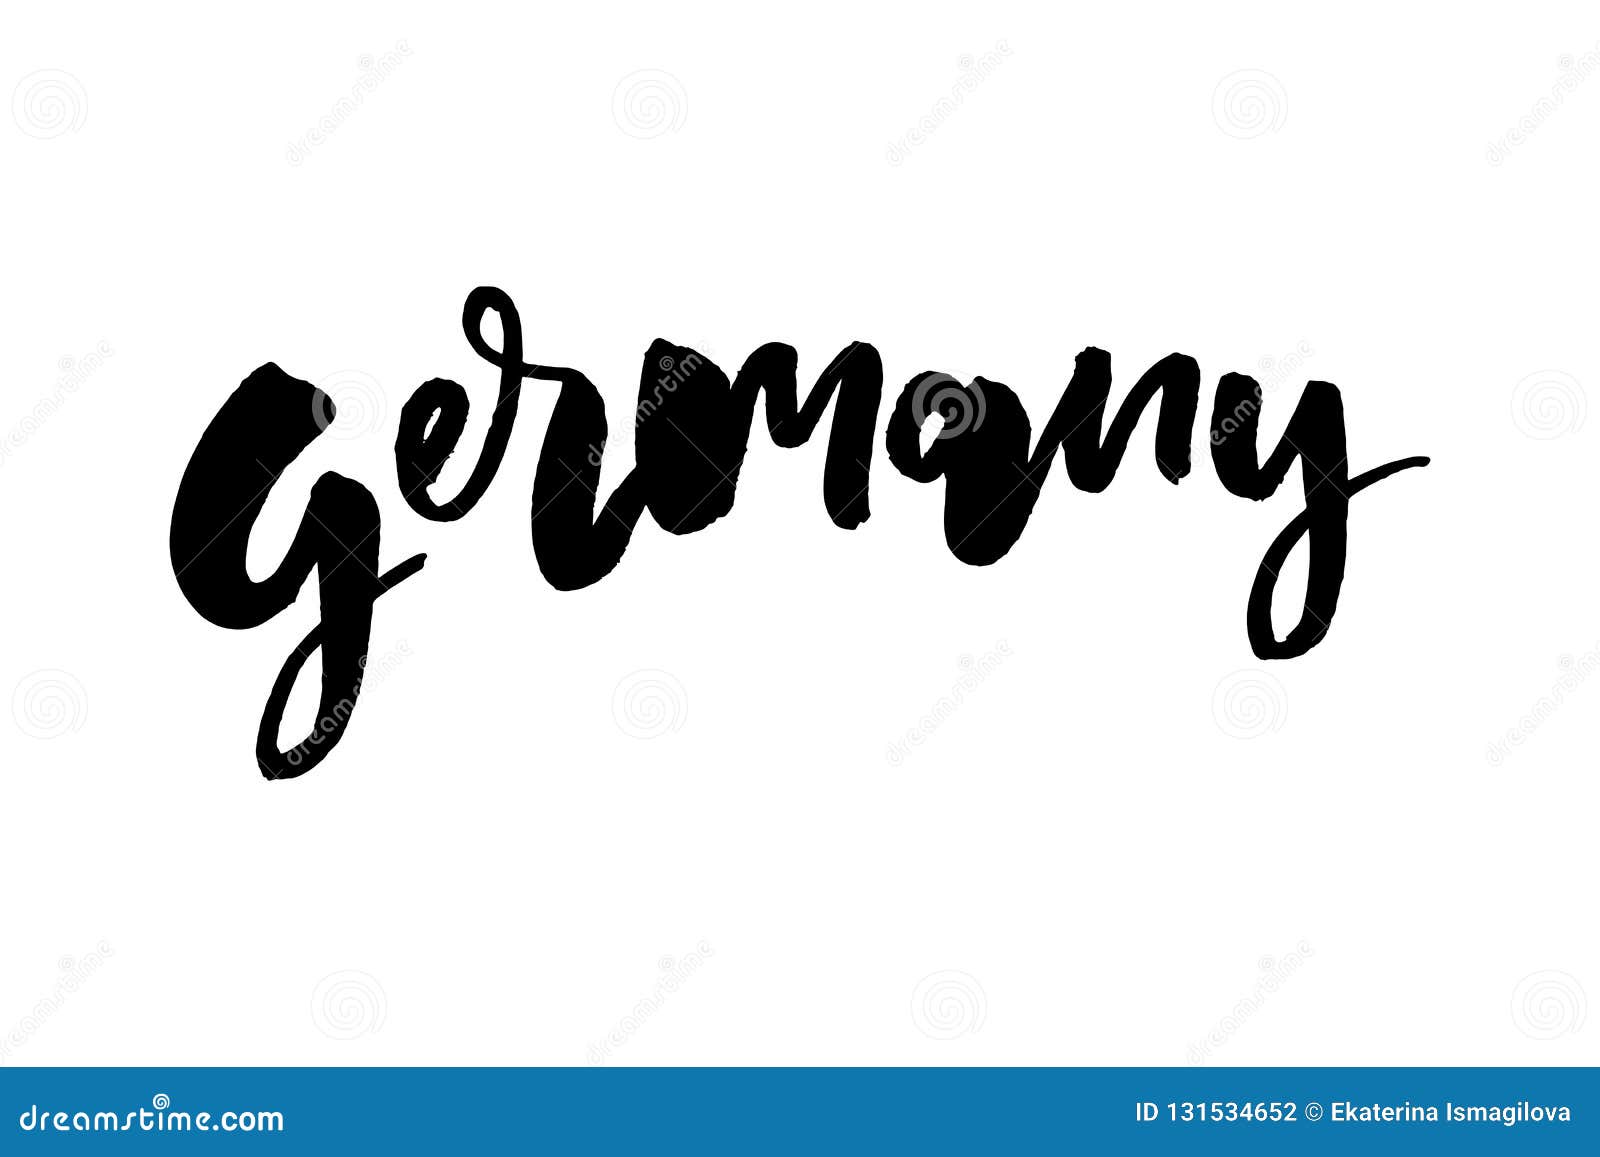 Script Text Word Art Lettering Design Vector Of Country Name For